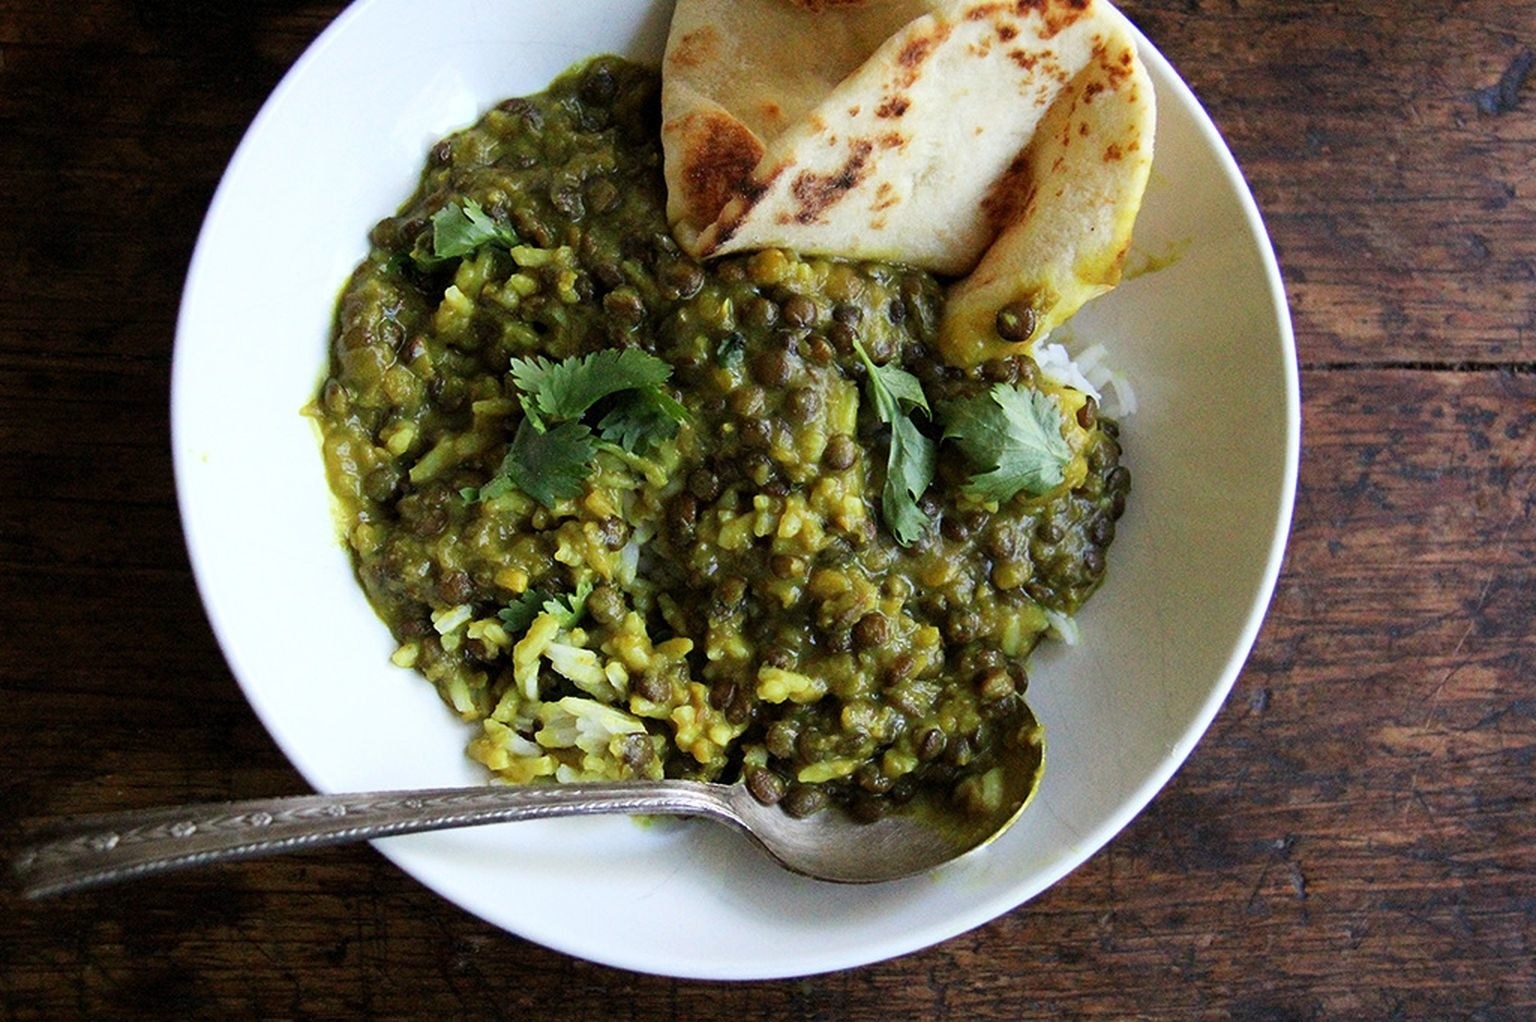 Curried lentils in a bowl with naan